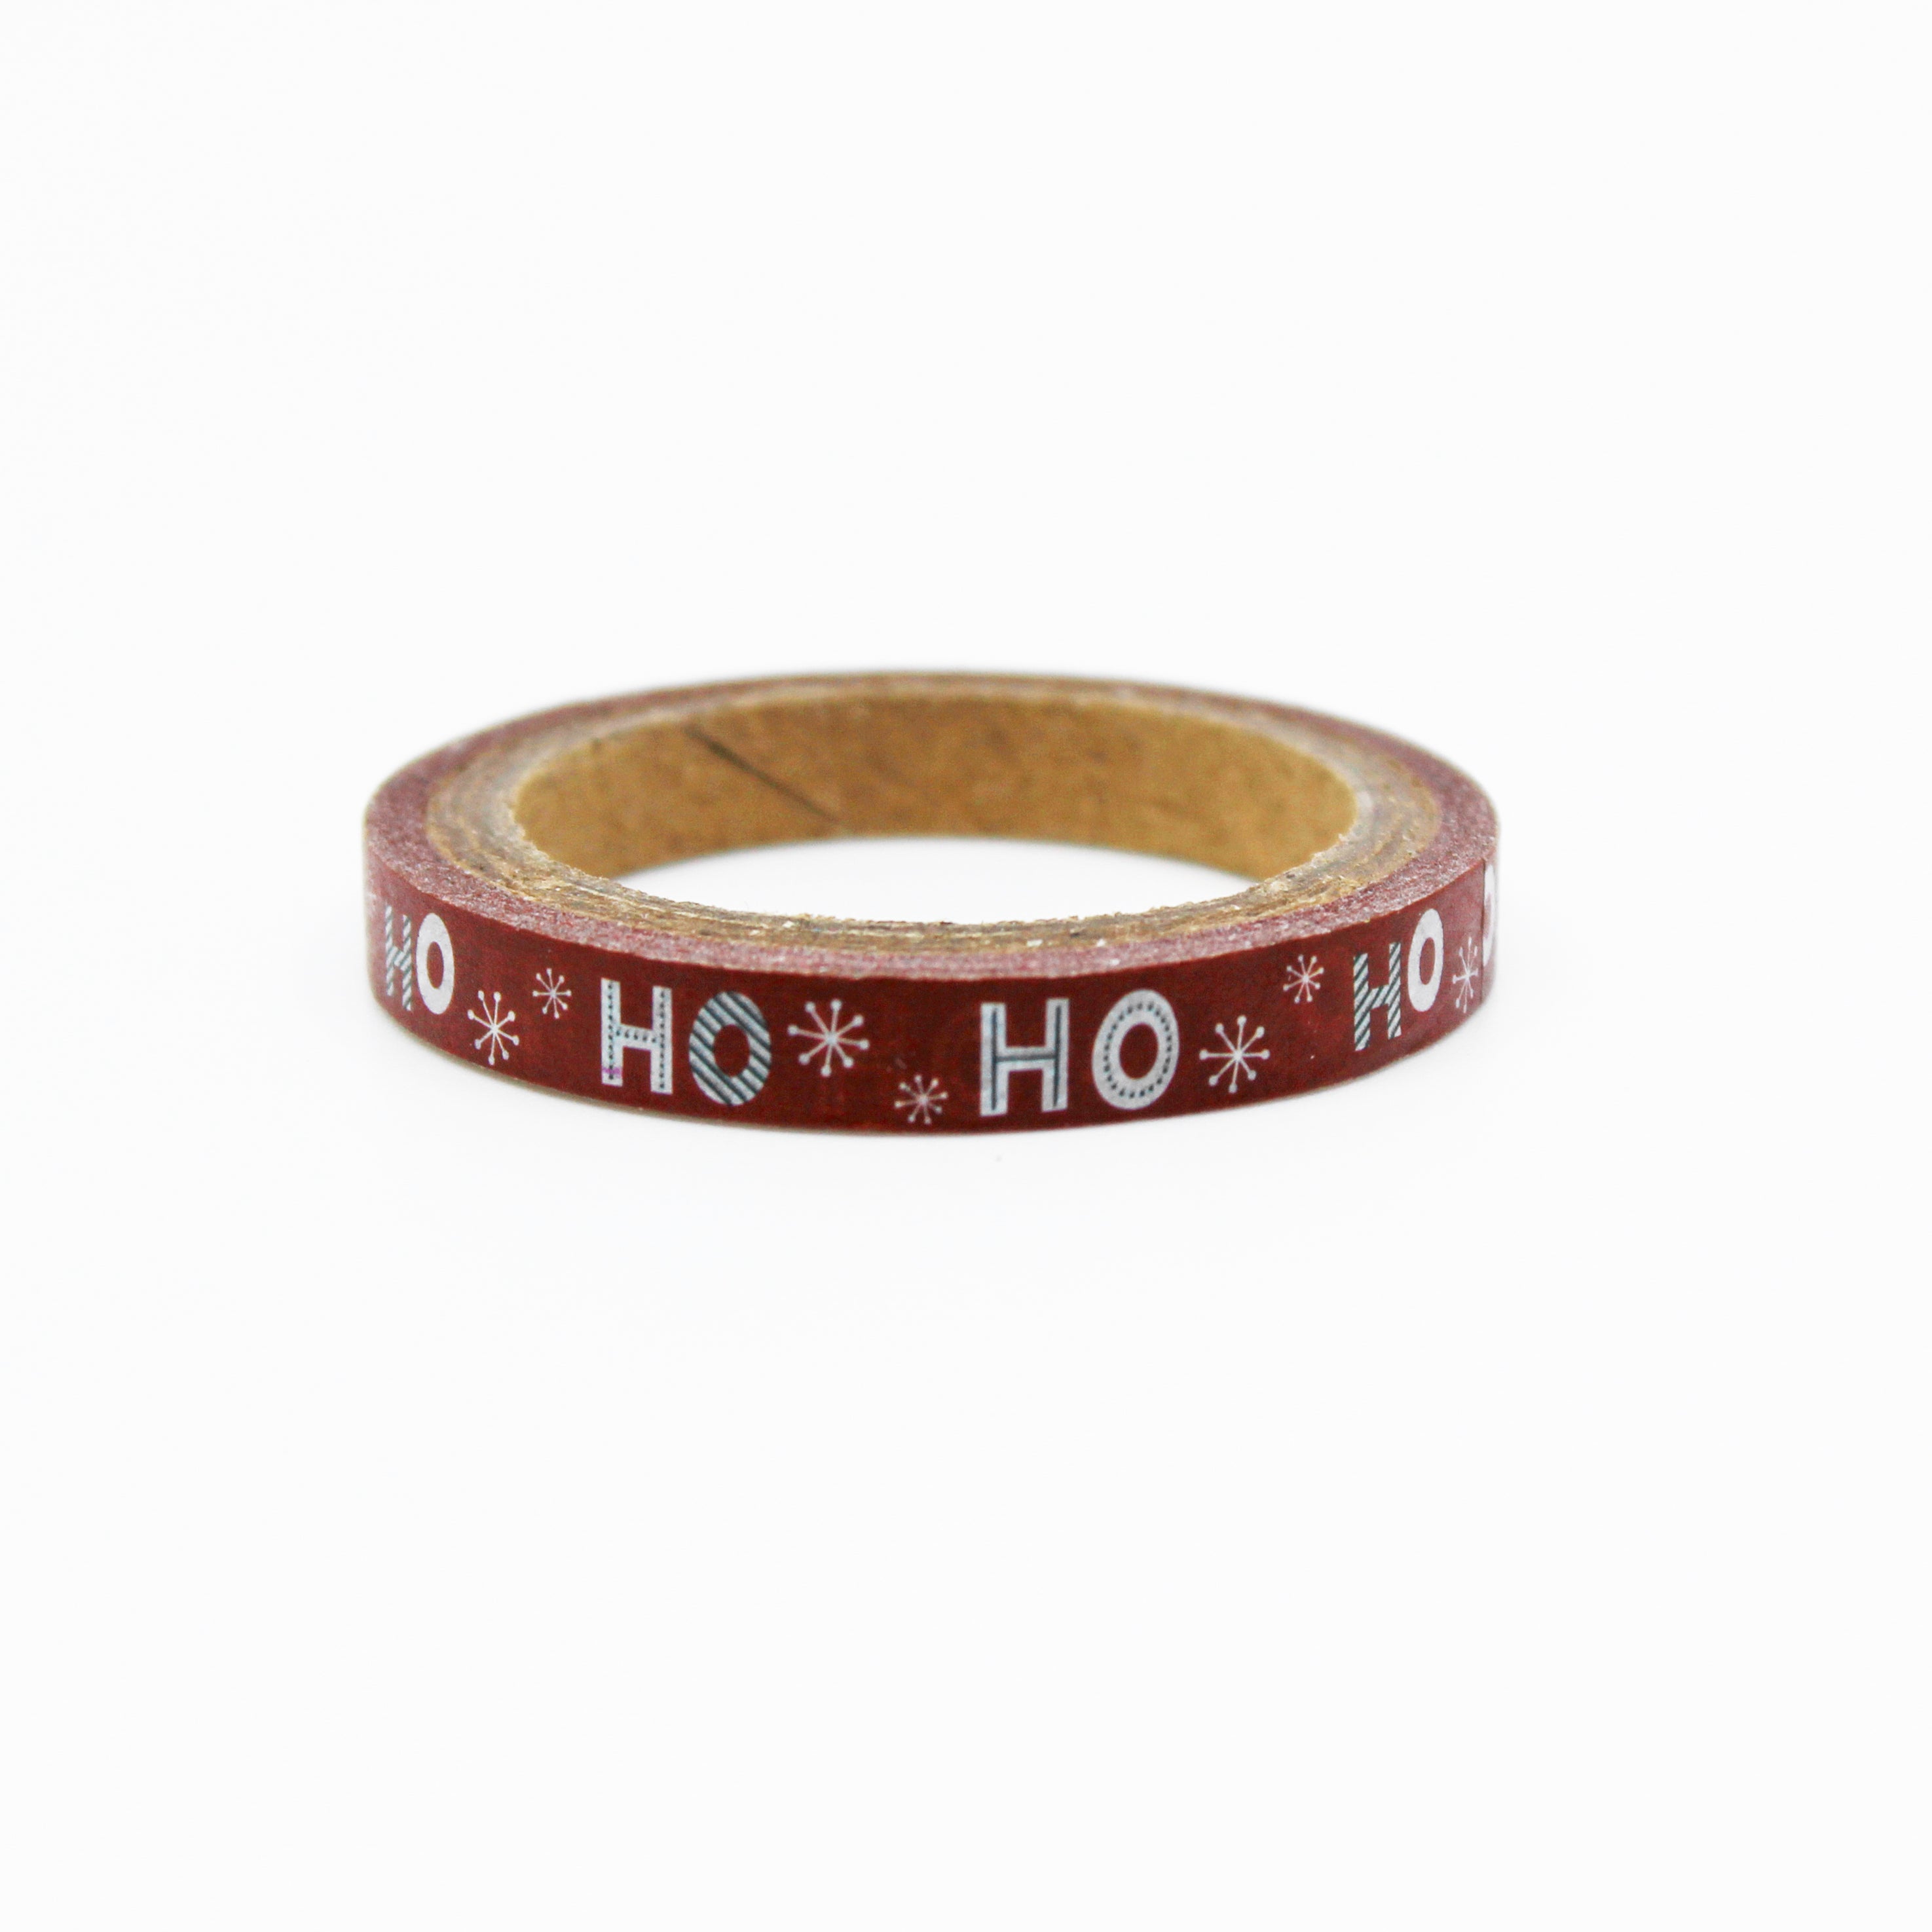 our Christmas "Ho Ho Ho" Washi Tape, a tape that captures the jolly spirit of the holiday season with a touch of festive cheer. This tape is sold at BBB Supplies Craft Shop.